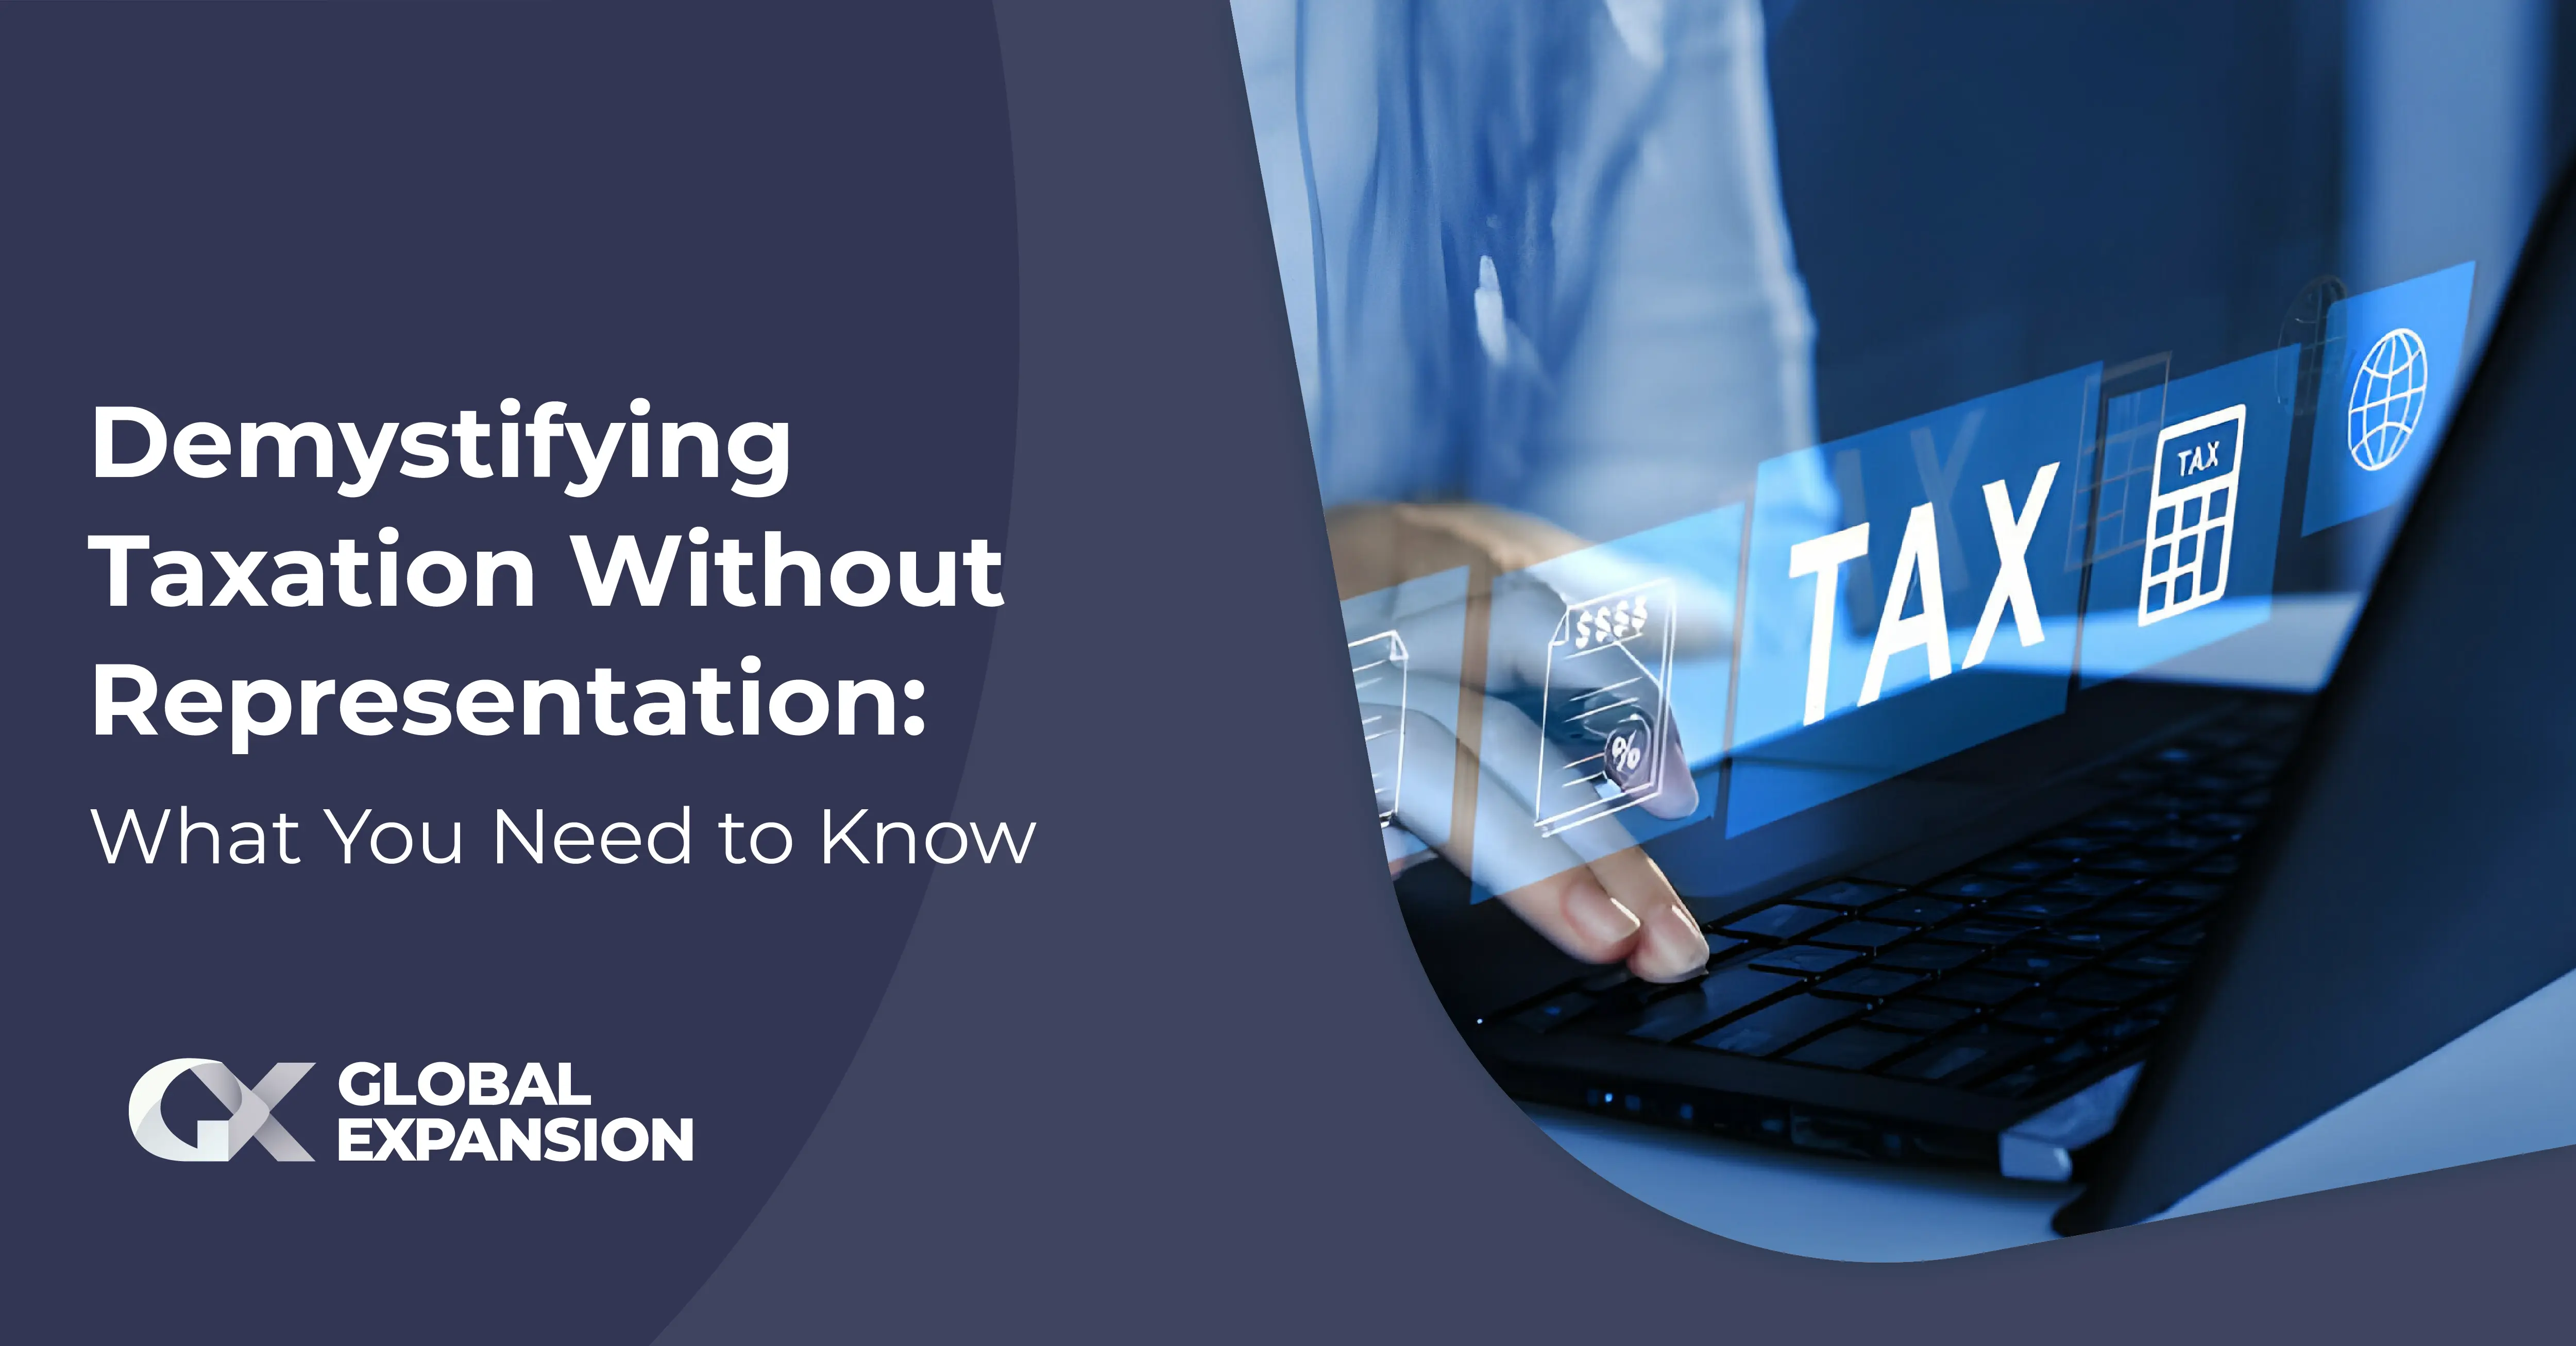 Demystifying Taxation Without Representation: What You Need to Know